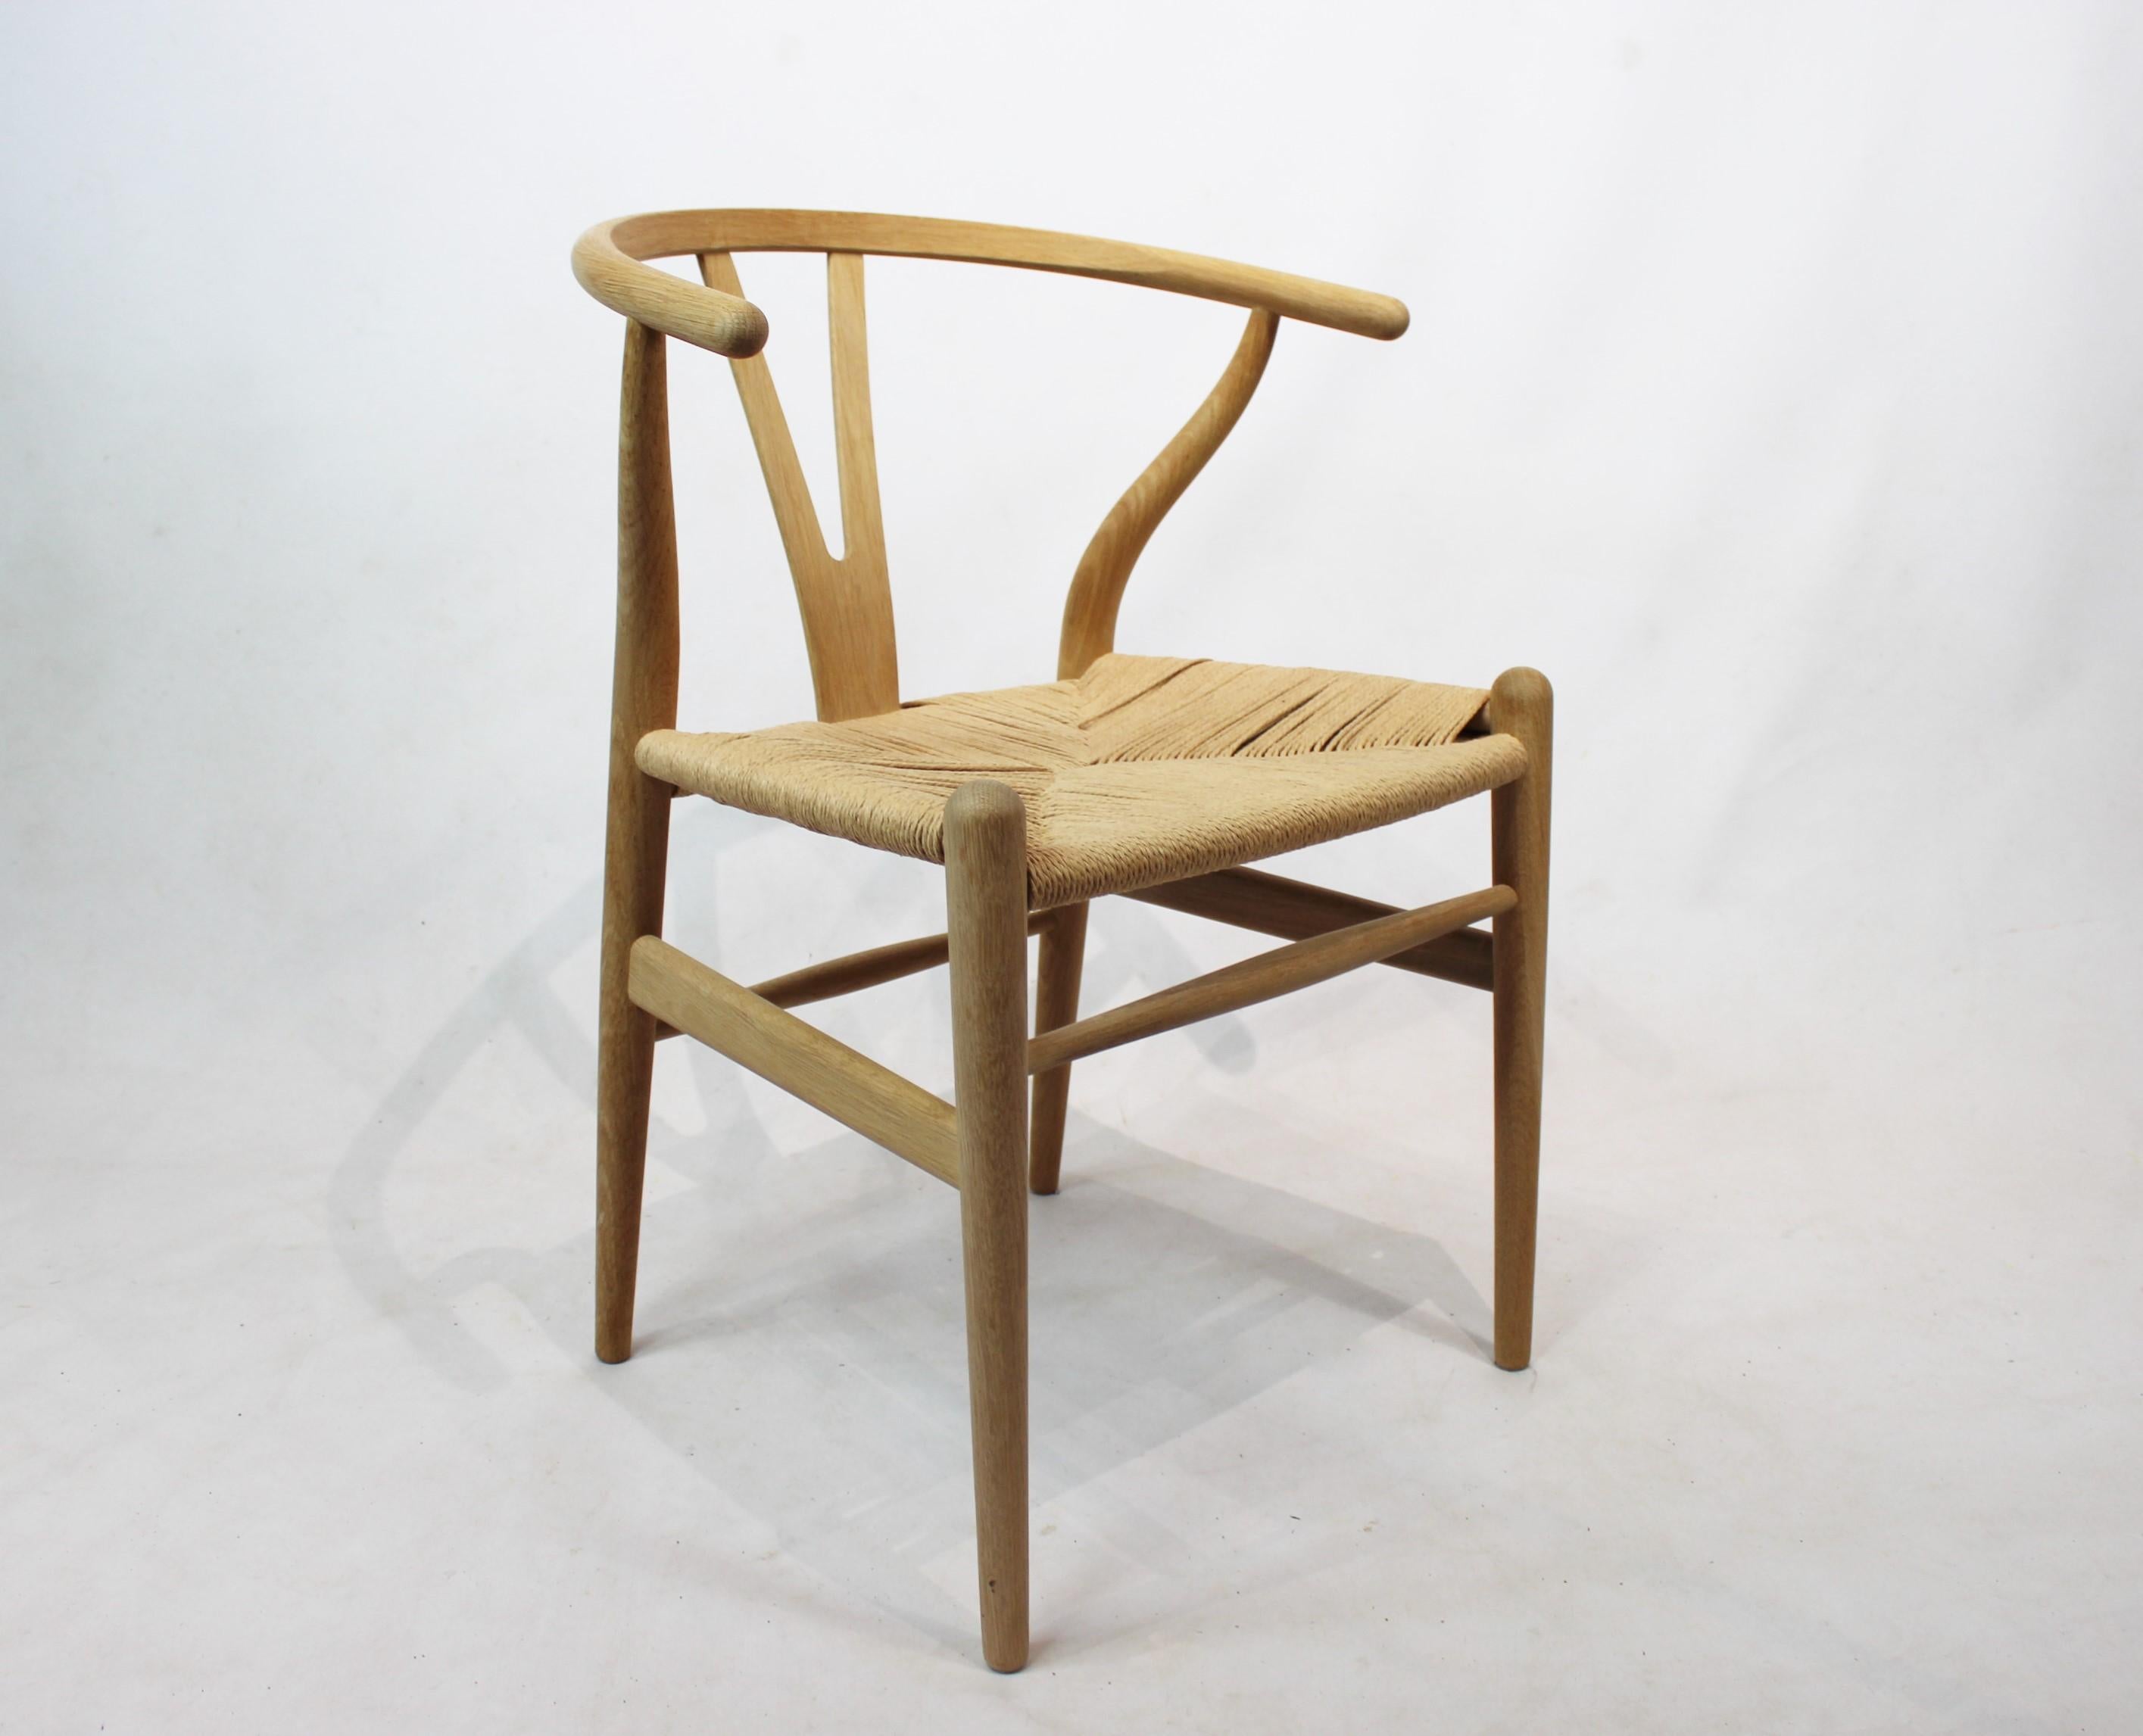 Wishbone chair, model CH24, in oak and paper cord designed by Hans J. Wegner and manufactured by Carl Hansen & Son in the 1960s. The chair are in great vintage condition.
Measures: H - 73.5 cm, W - 55 cm, D - 55 cm and SH - 42.5 cm.